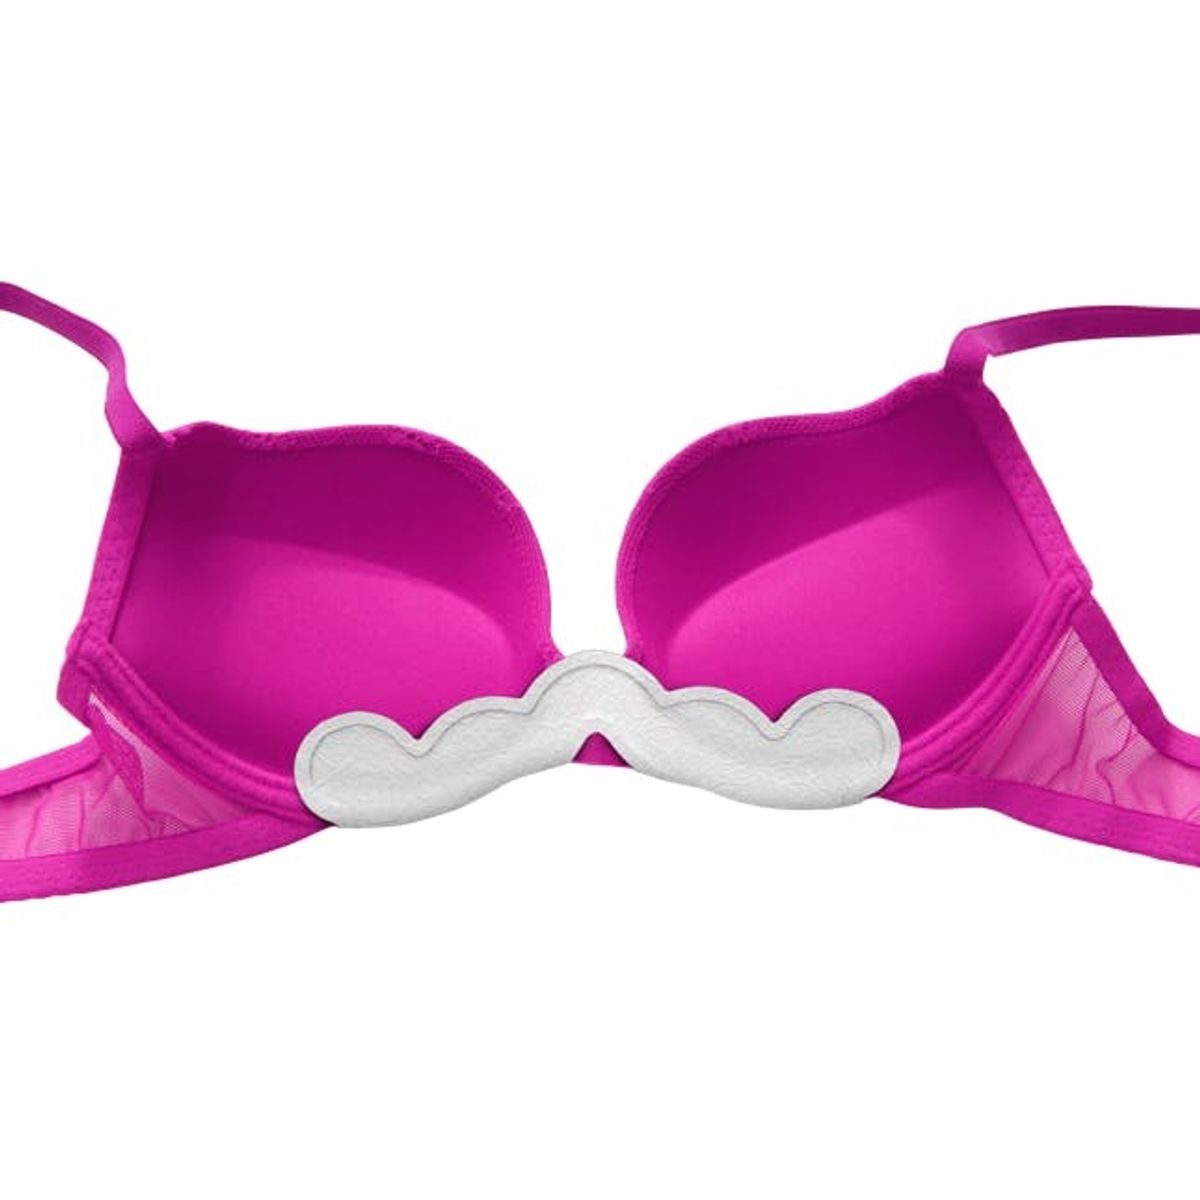 This New Bra Liner Is the Answer to Every Busty Girl’s Prayer